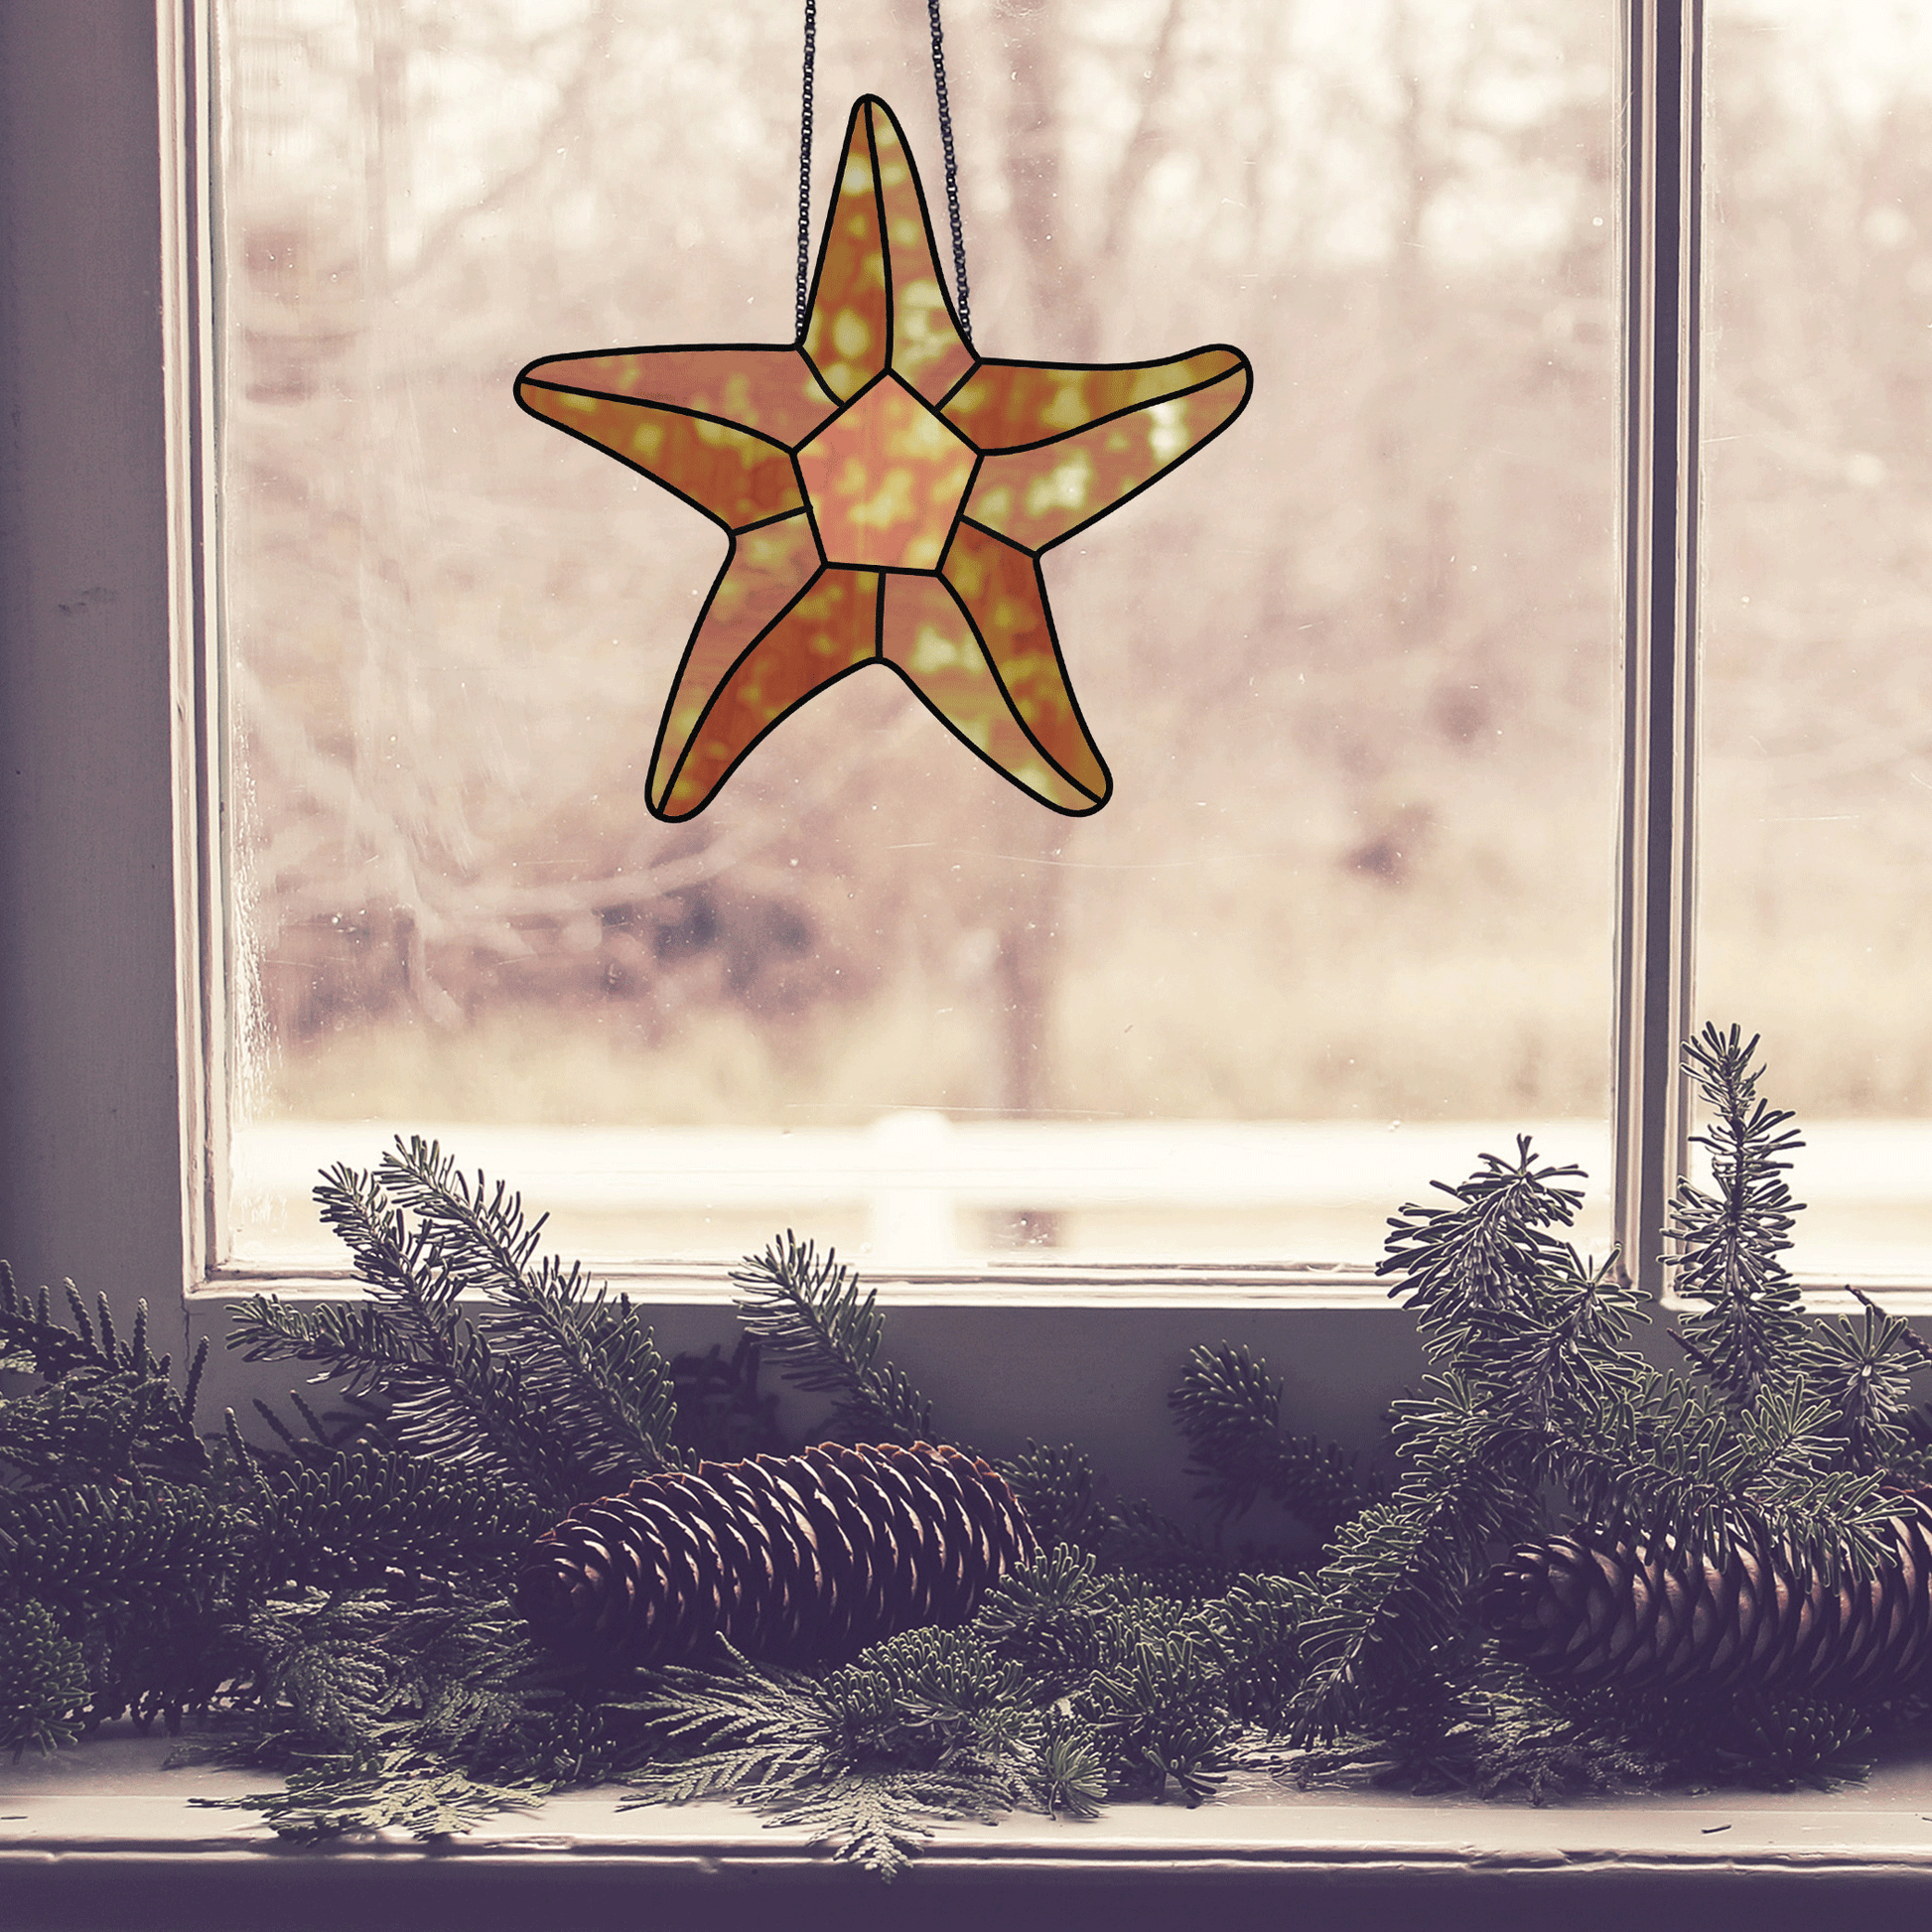 Starfish or seastar stained glass pattern, instant pdf download, shown in window with pine cones